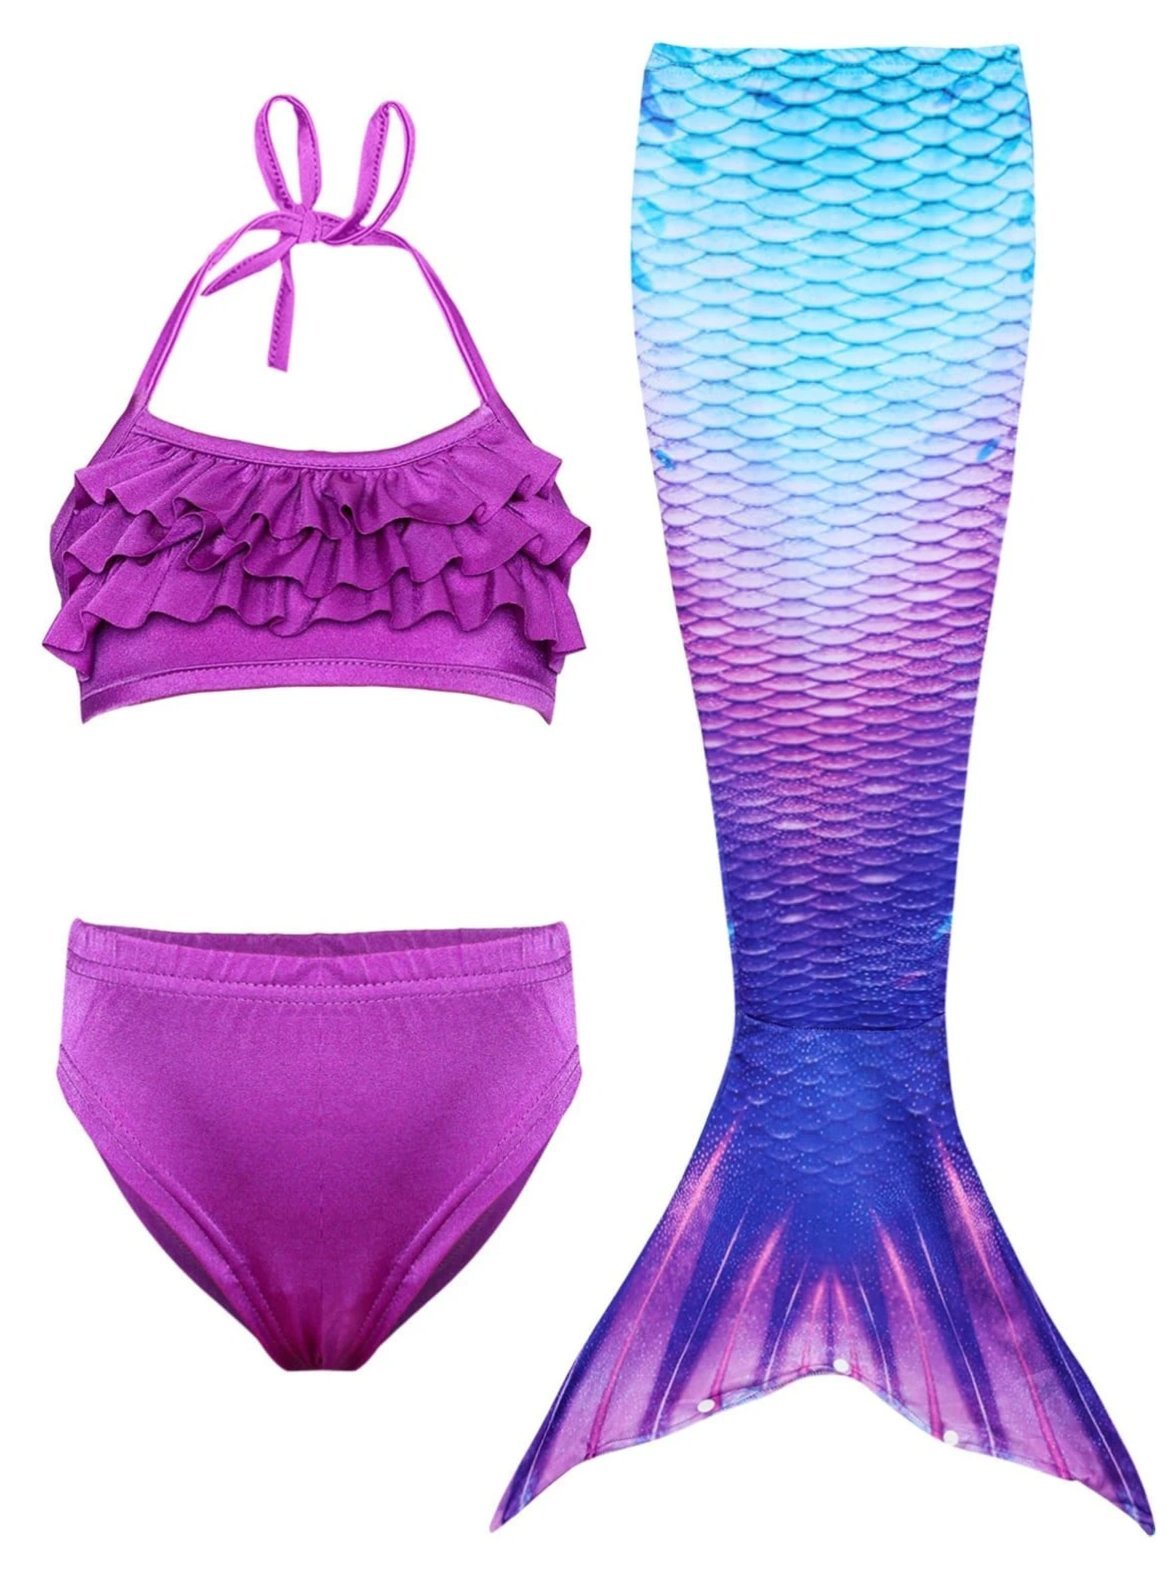 Girls Ruffled Halter Top Mermaid Two Piece Swimsuit With Multicolor Tail Skirt Cover Up - Purple / 3T/4T - Girls Mermaid Swimsuit